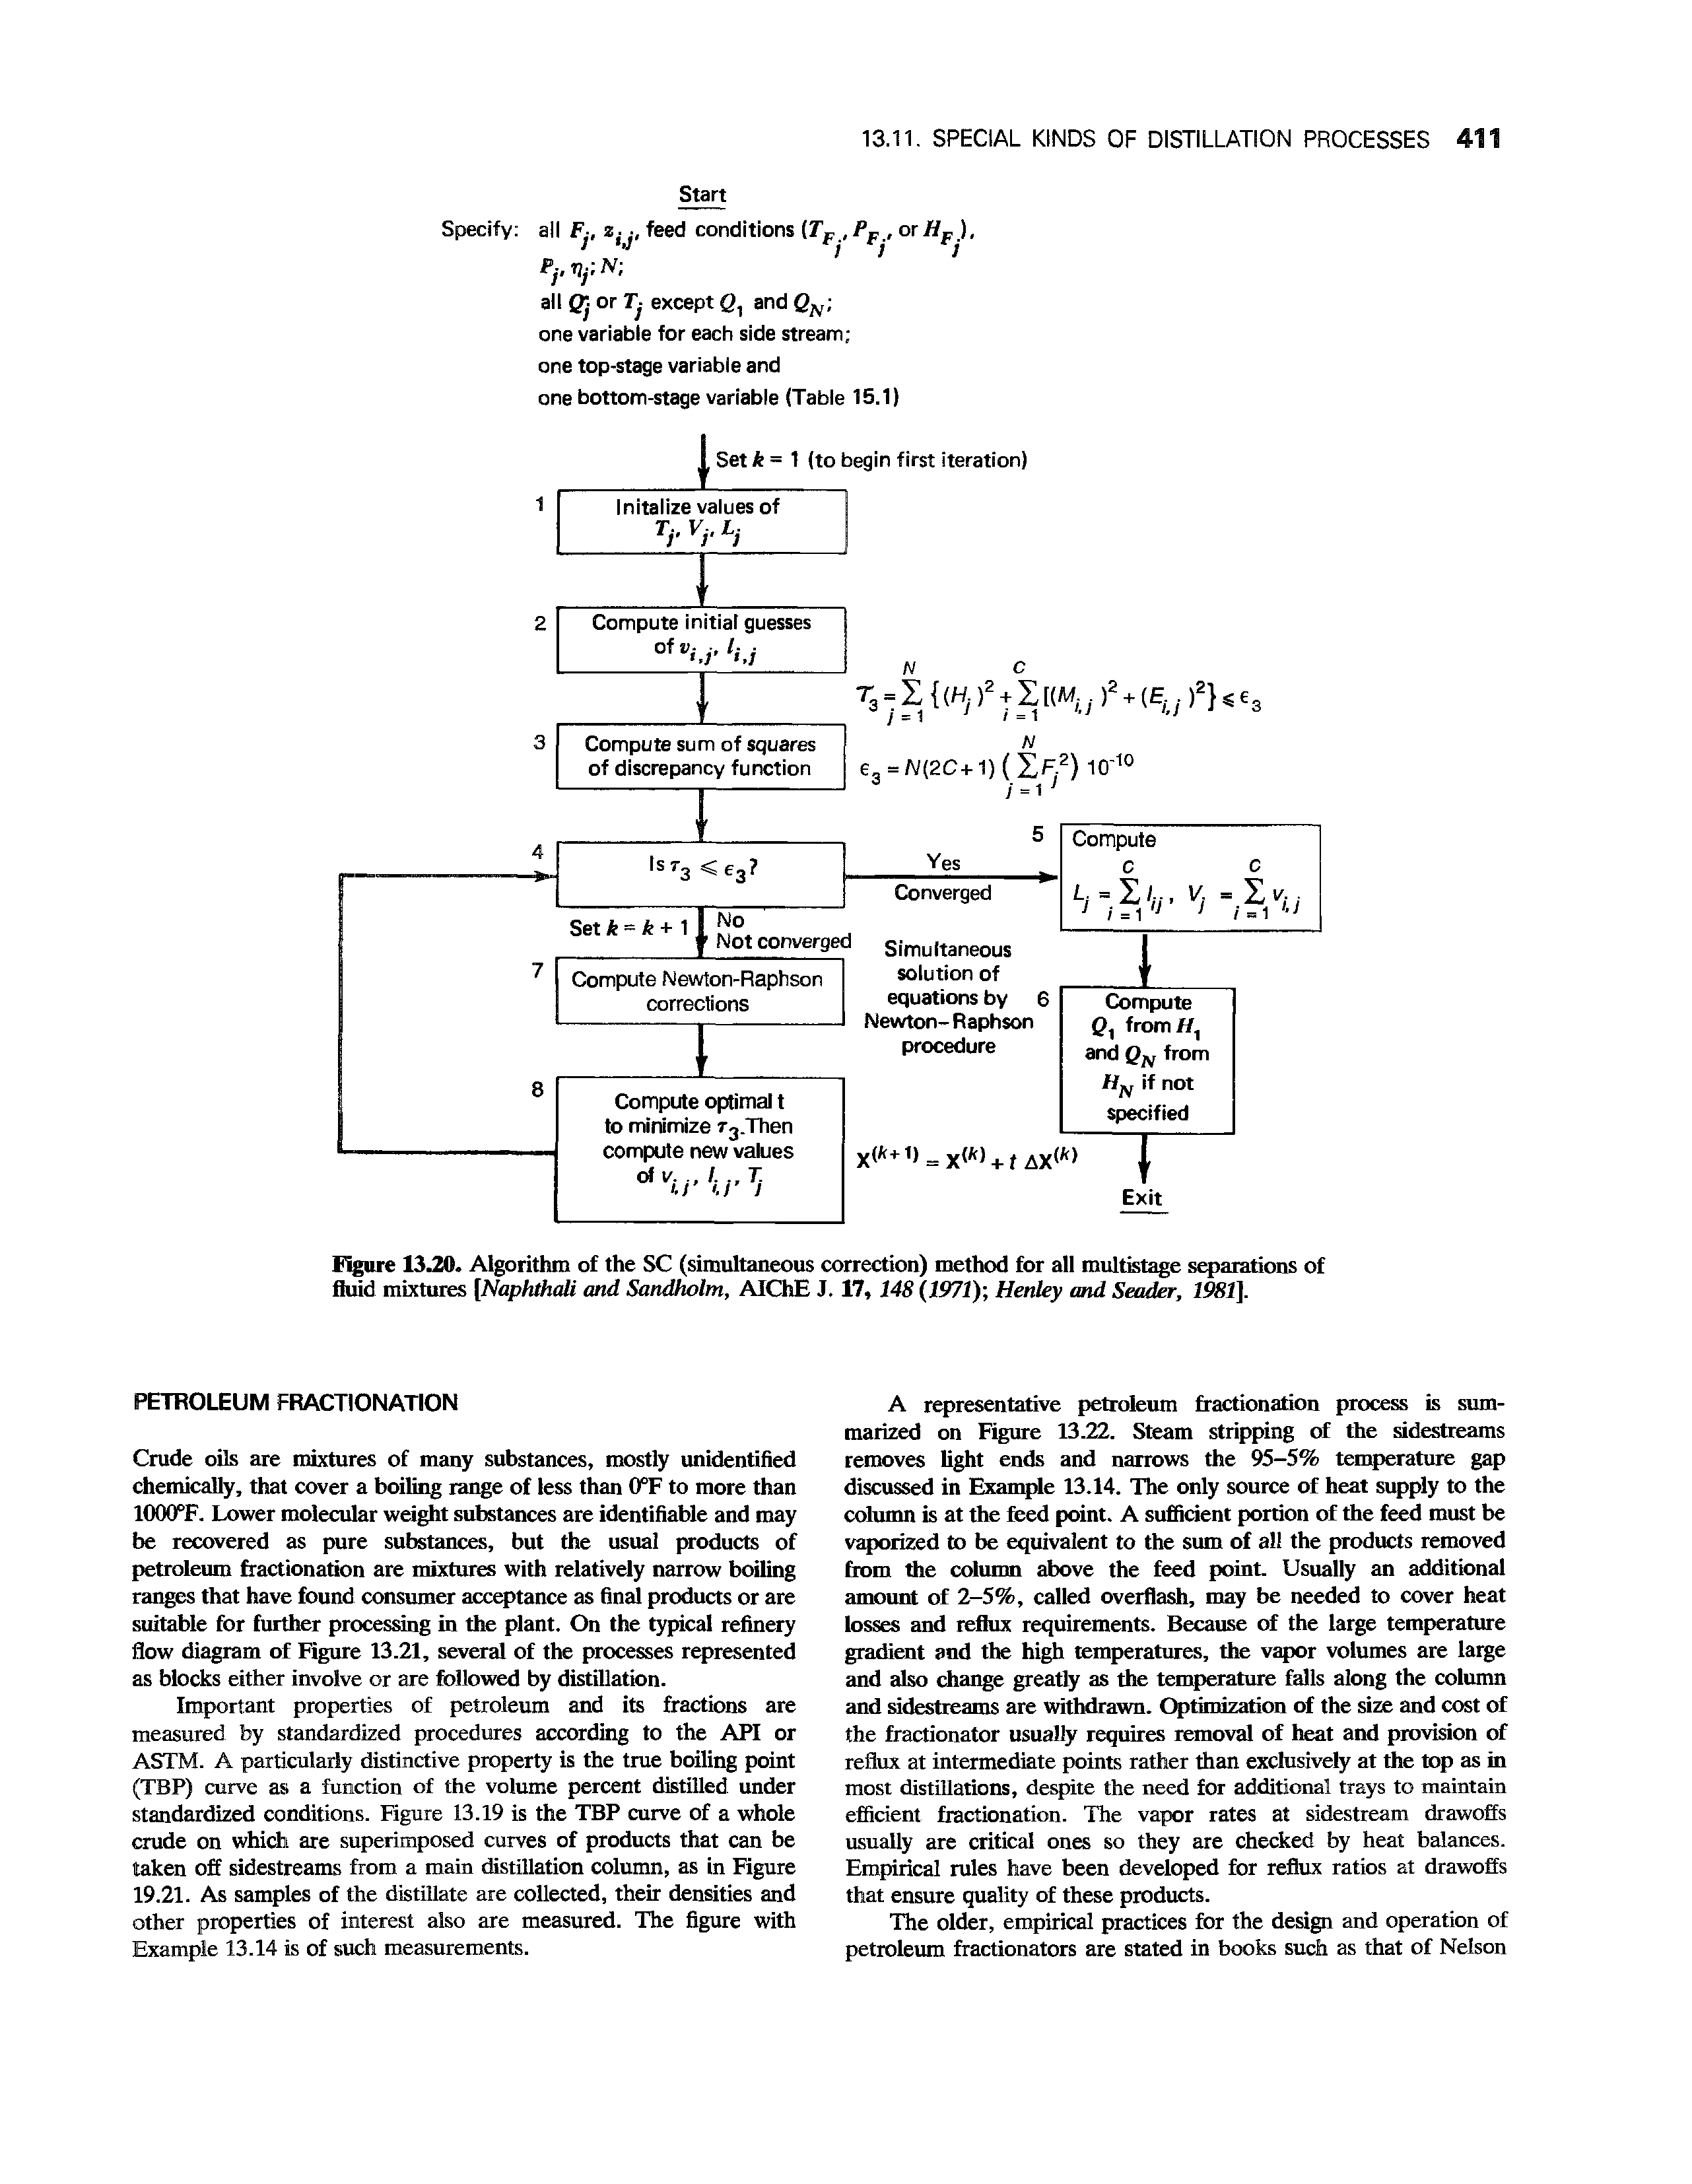 Figure 13.20. Algorithm of the SC (simultaneous correction) method for all multistage separations of fluid mixtures [Naphthati and Sandholm, AIChE J. 17, 148 (1971), Henley and Seader, 1981].